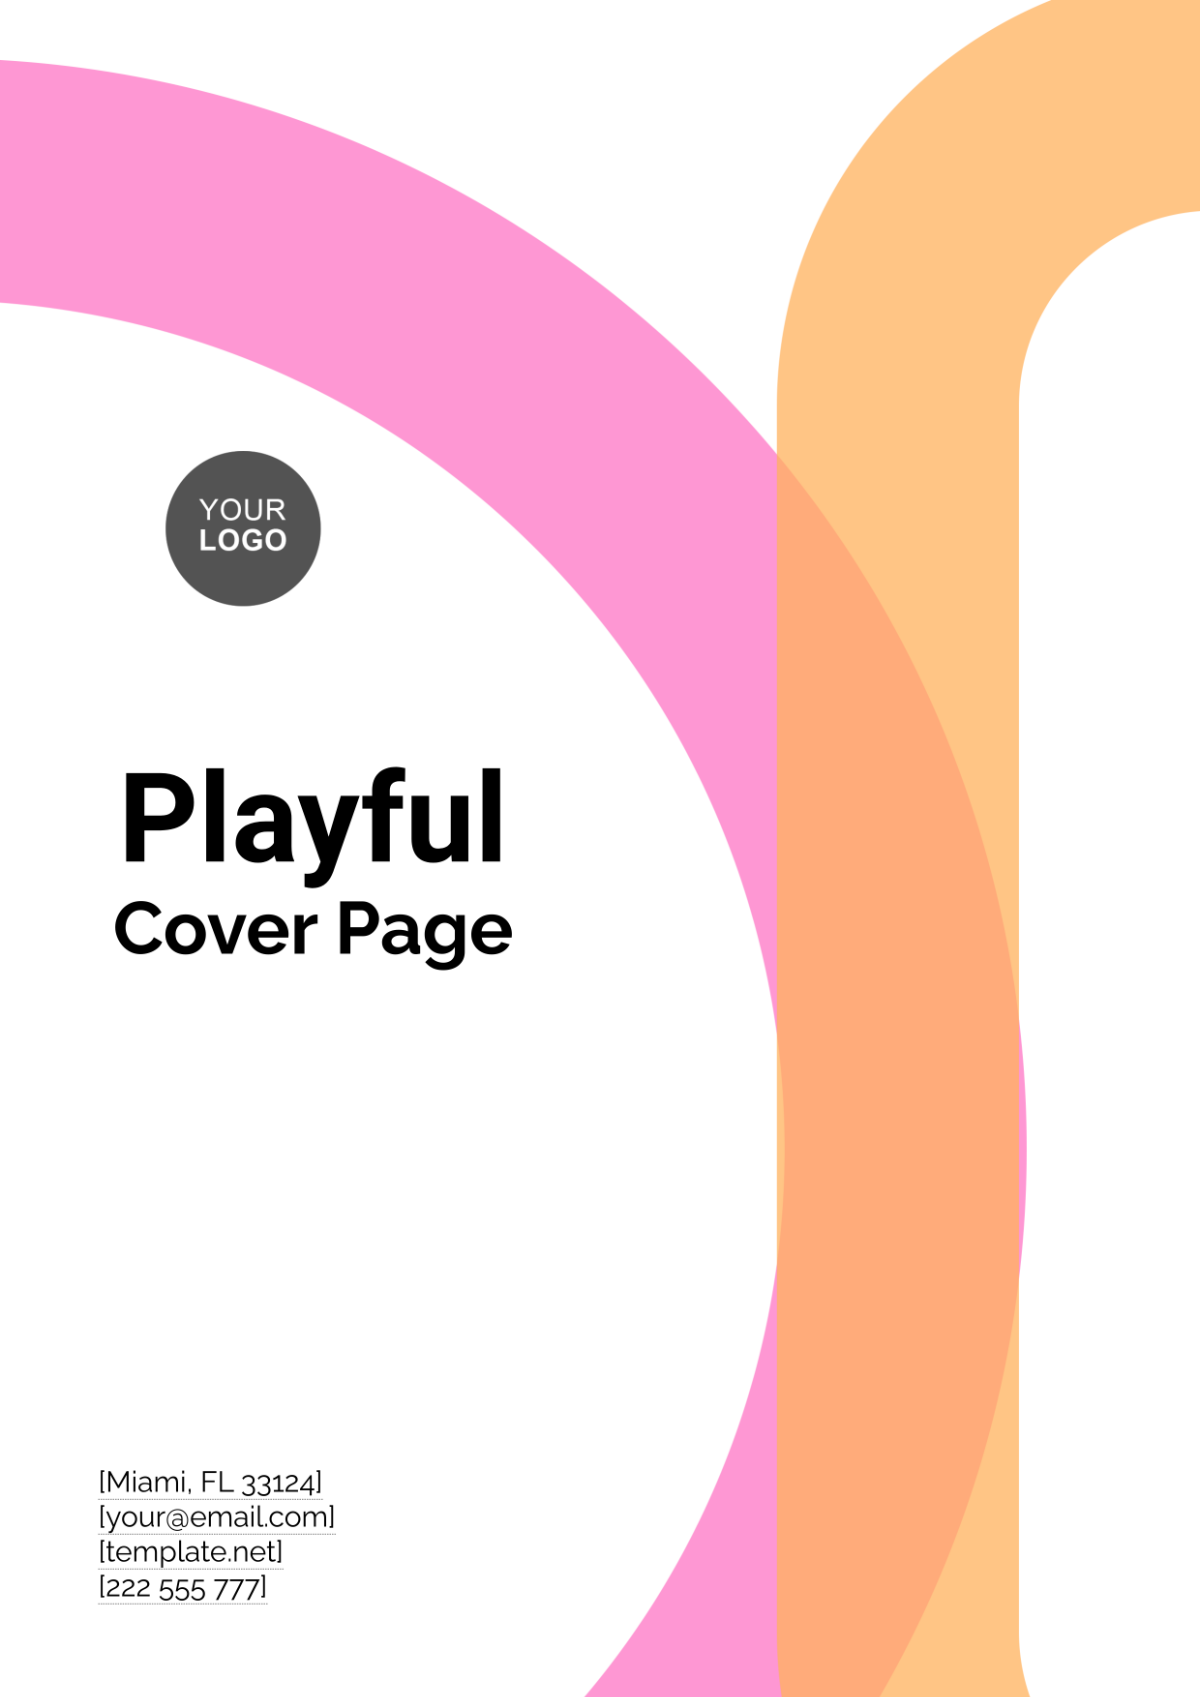 Playful Cover Page Design